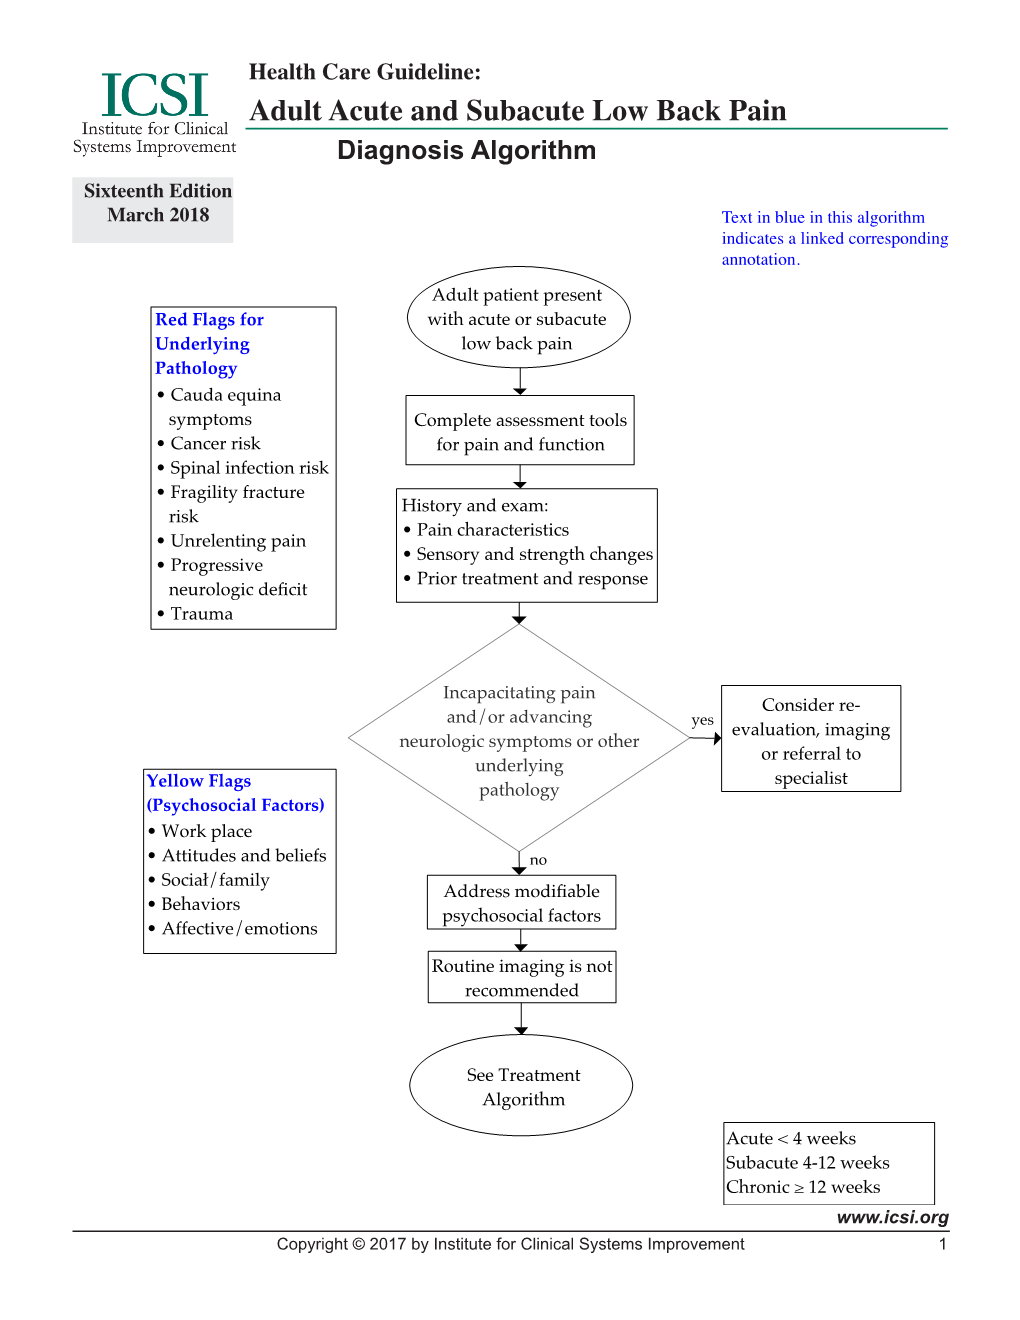 Adult Acute and Subacute Low Back Pain Diagnosis Algorithm Sixteenth Edition March 2018 Text in Blue in This Algorithm Indicates a Linked Corresponding Annotation